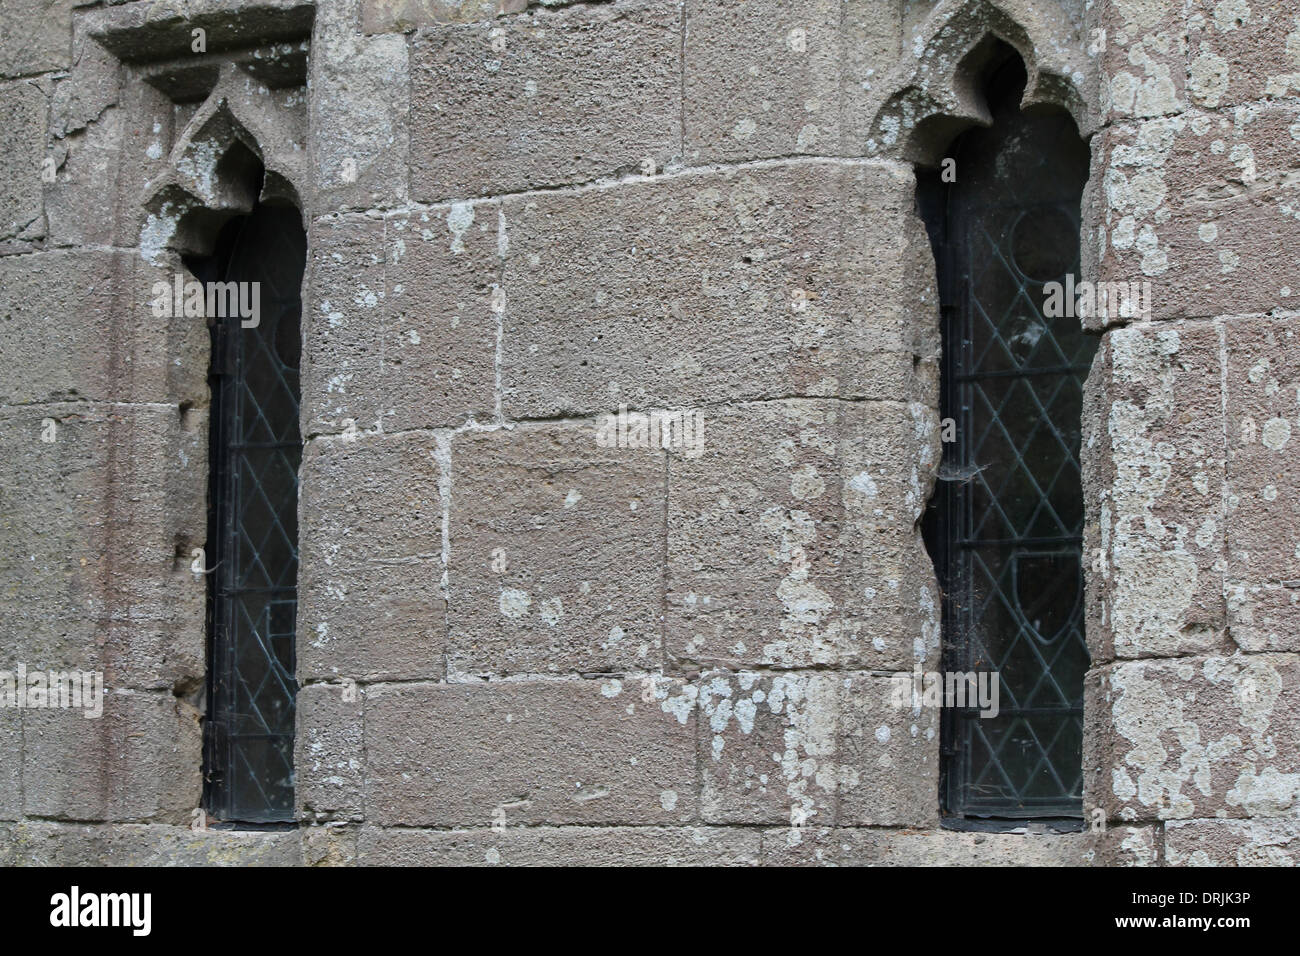 stone walls arched windows, castle Stock Photo